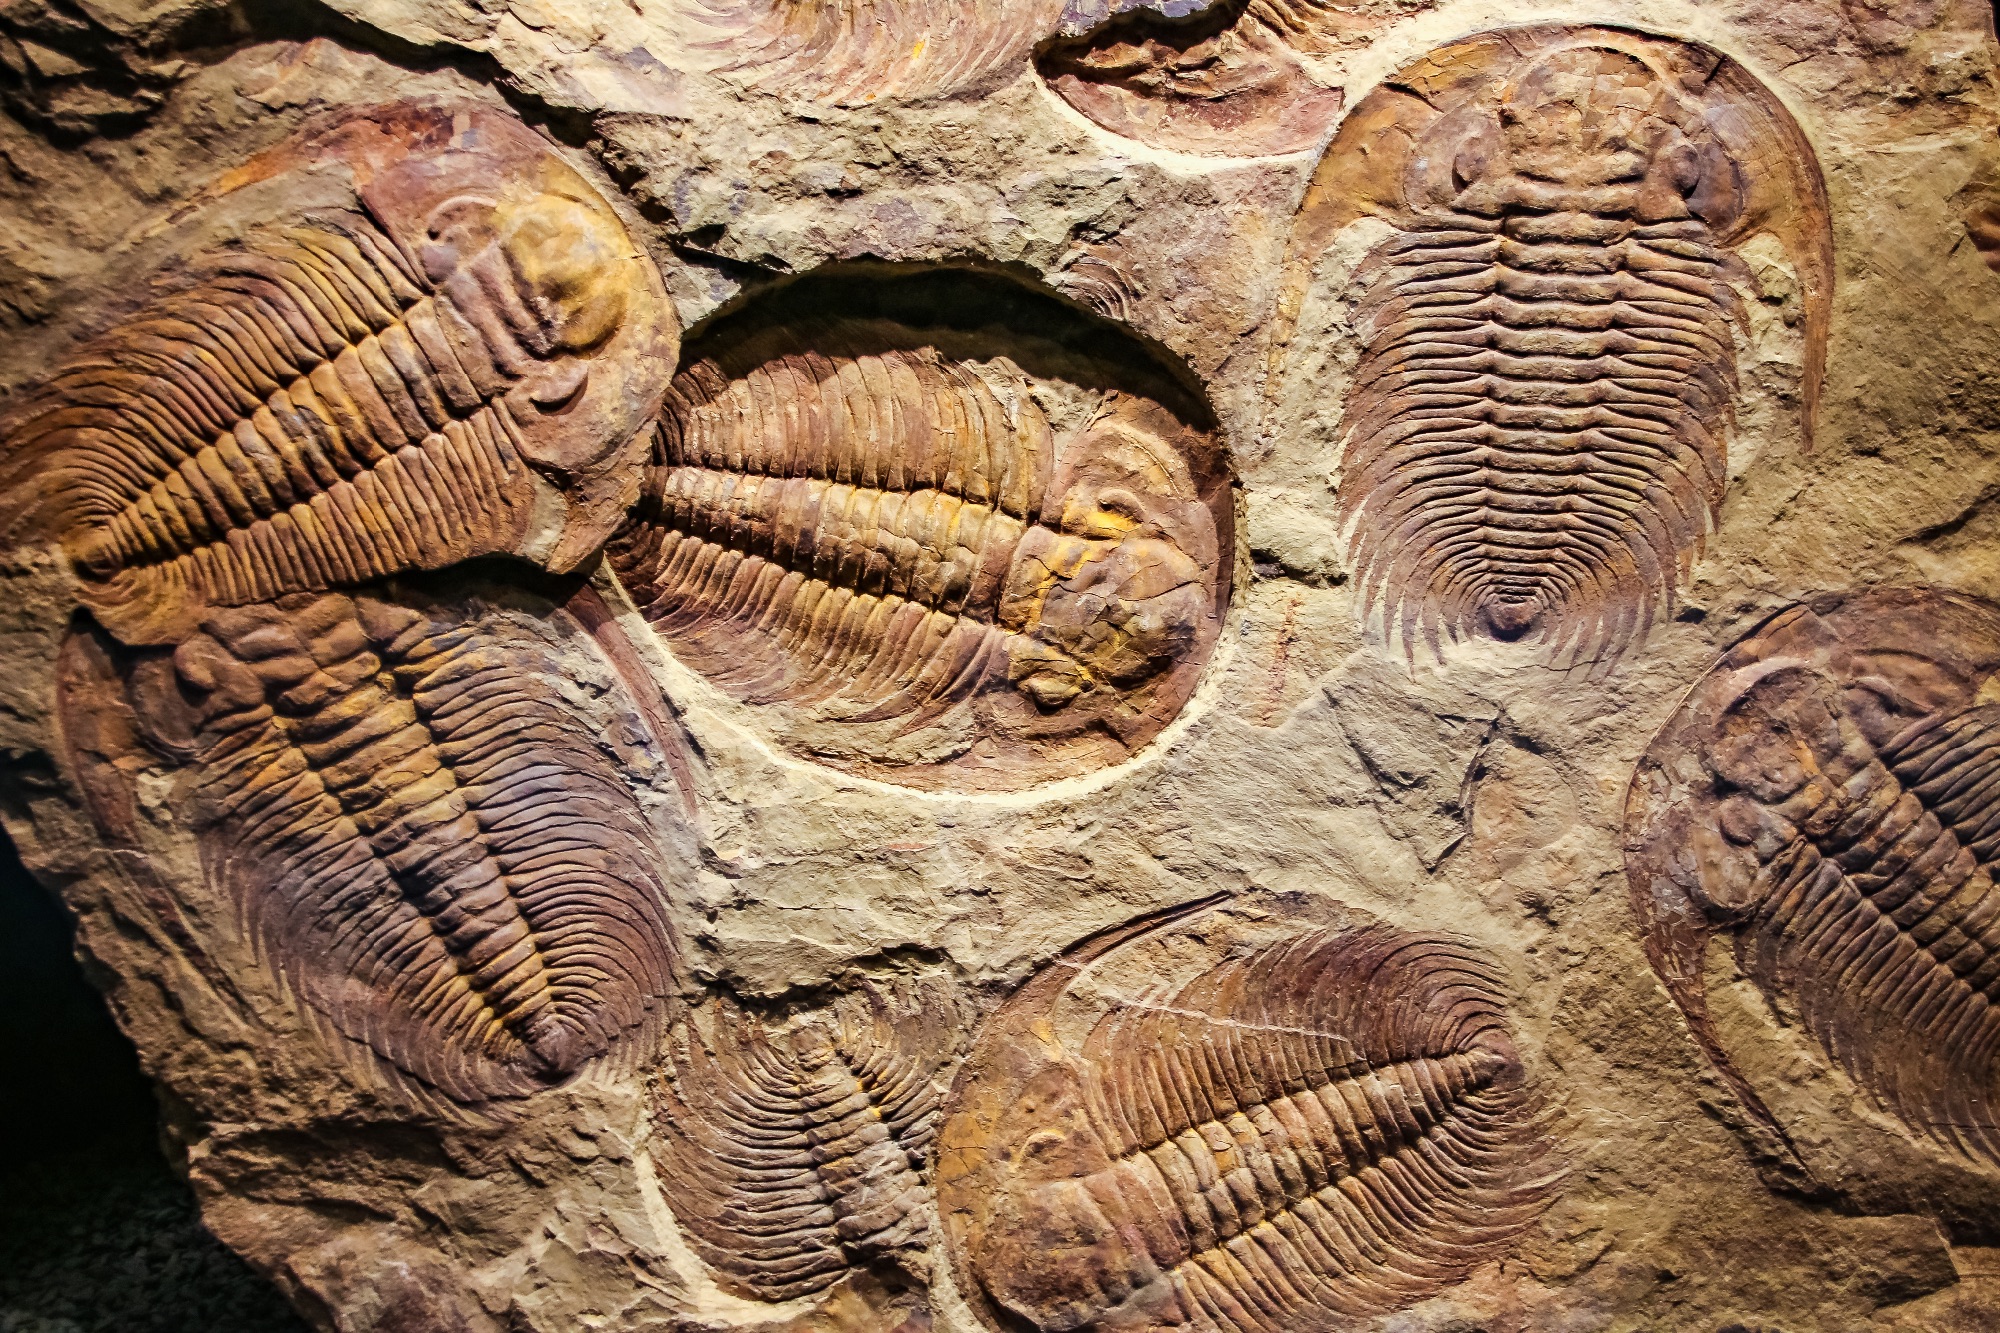 seven fossil trilobites layed overlapping eachother fossilsed with a light coloured stone matrix